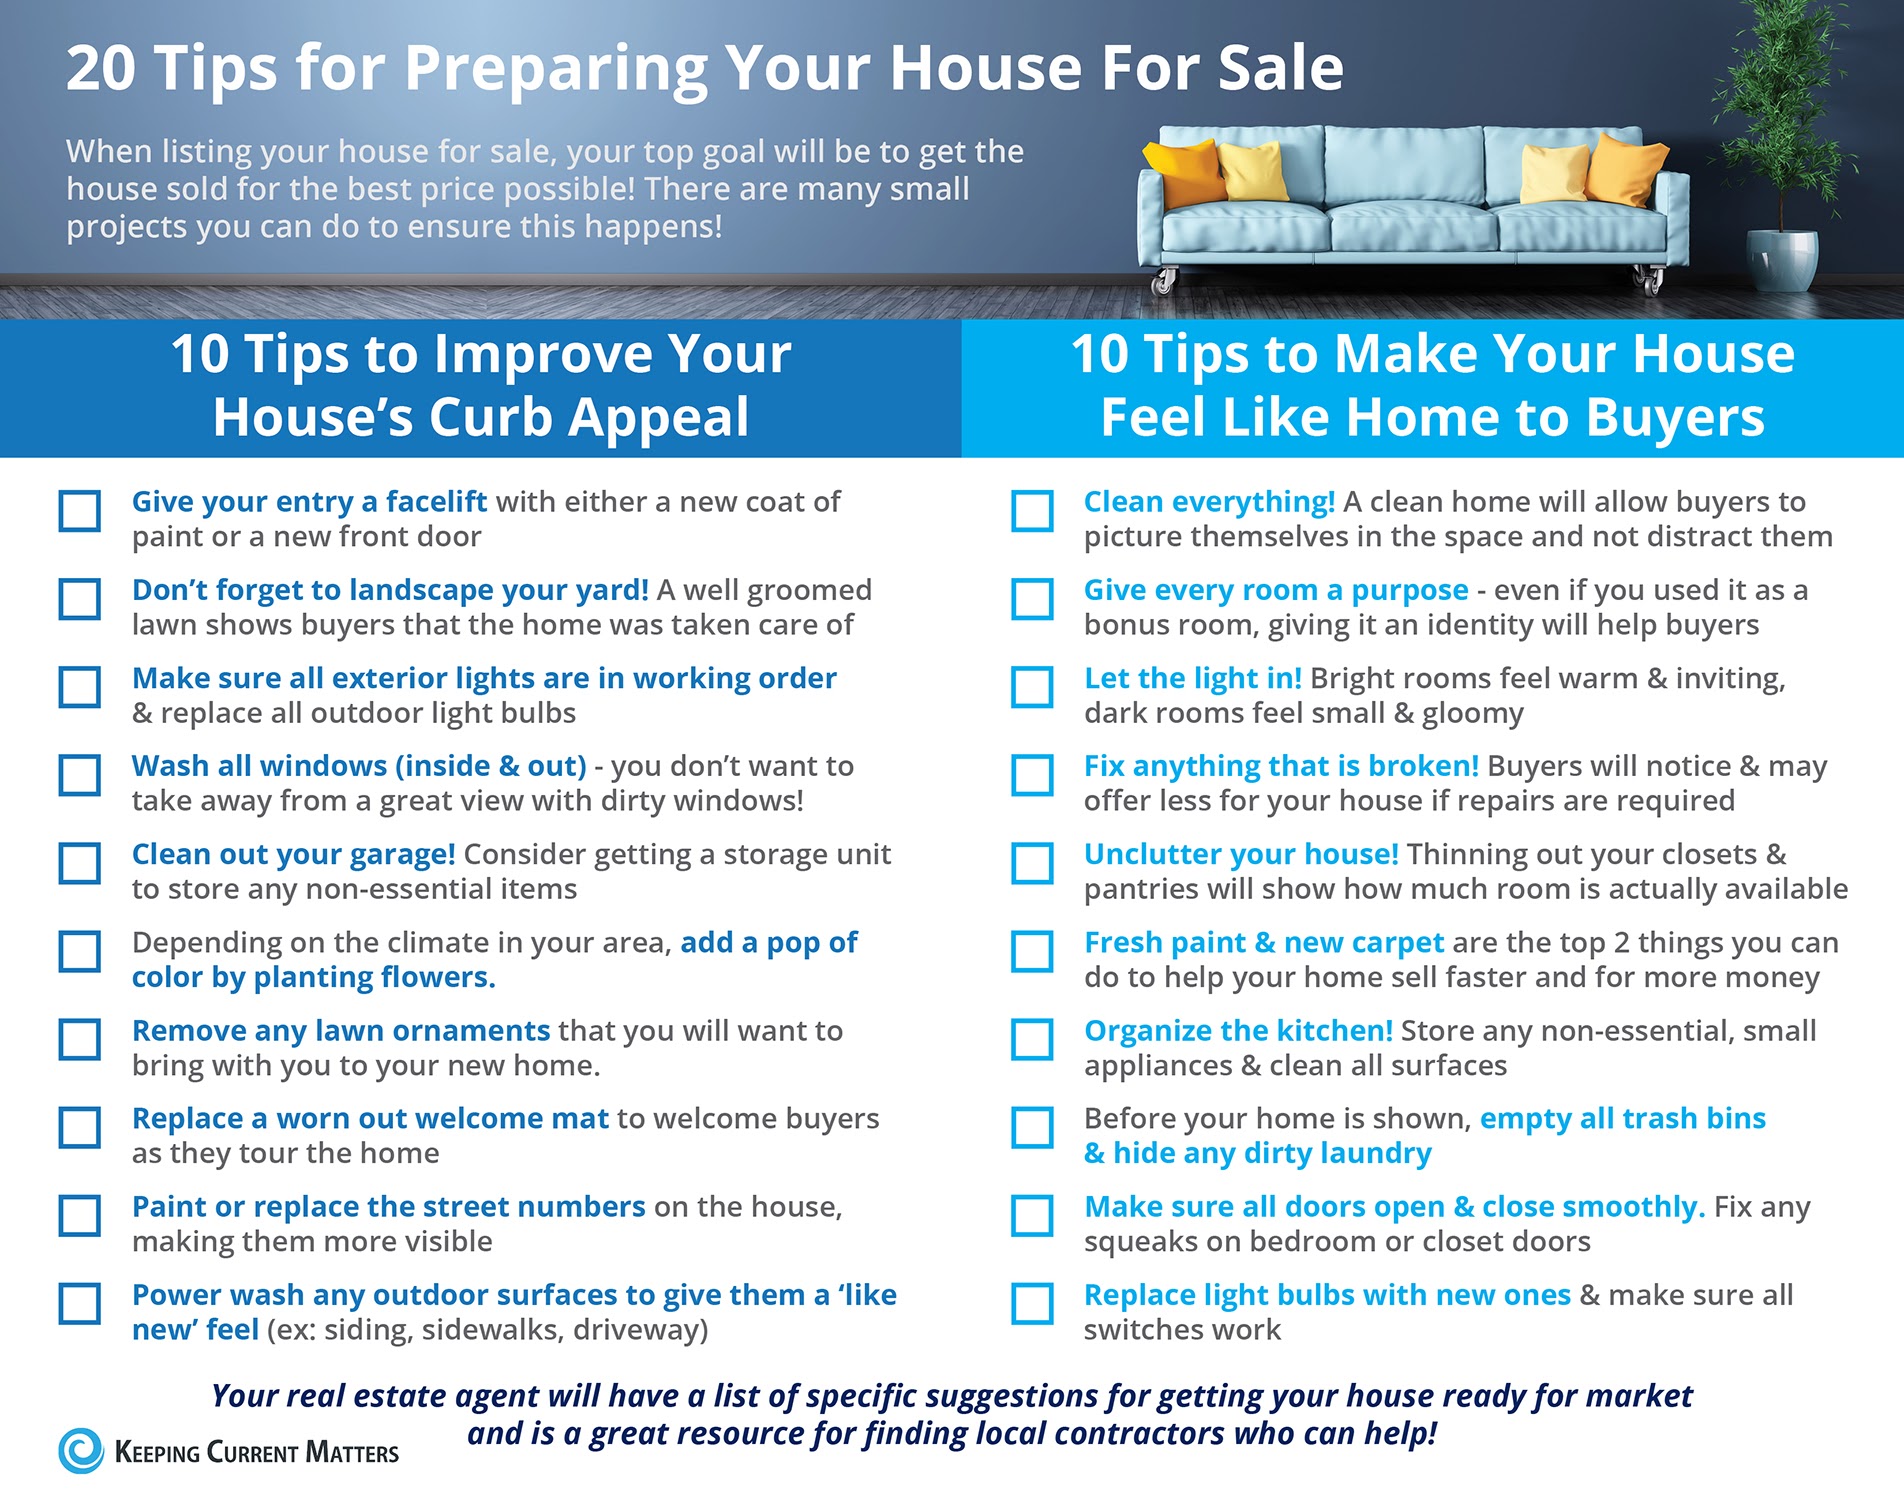 Tips for Preparing Your House for Sale This Spring [INFOGRAPHIC] | Keeping Current Matters